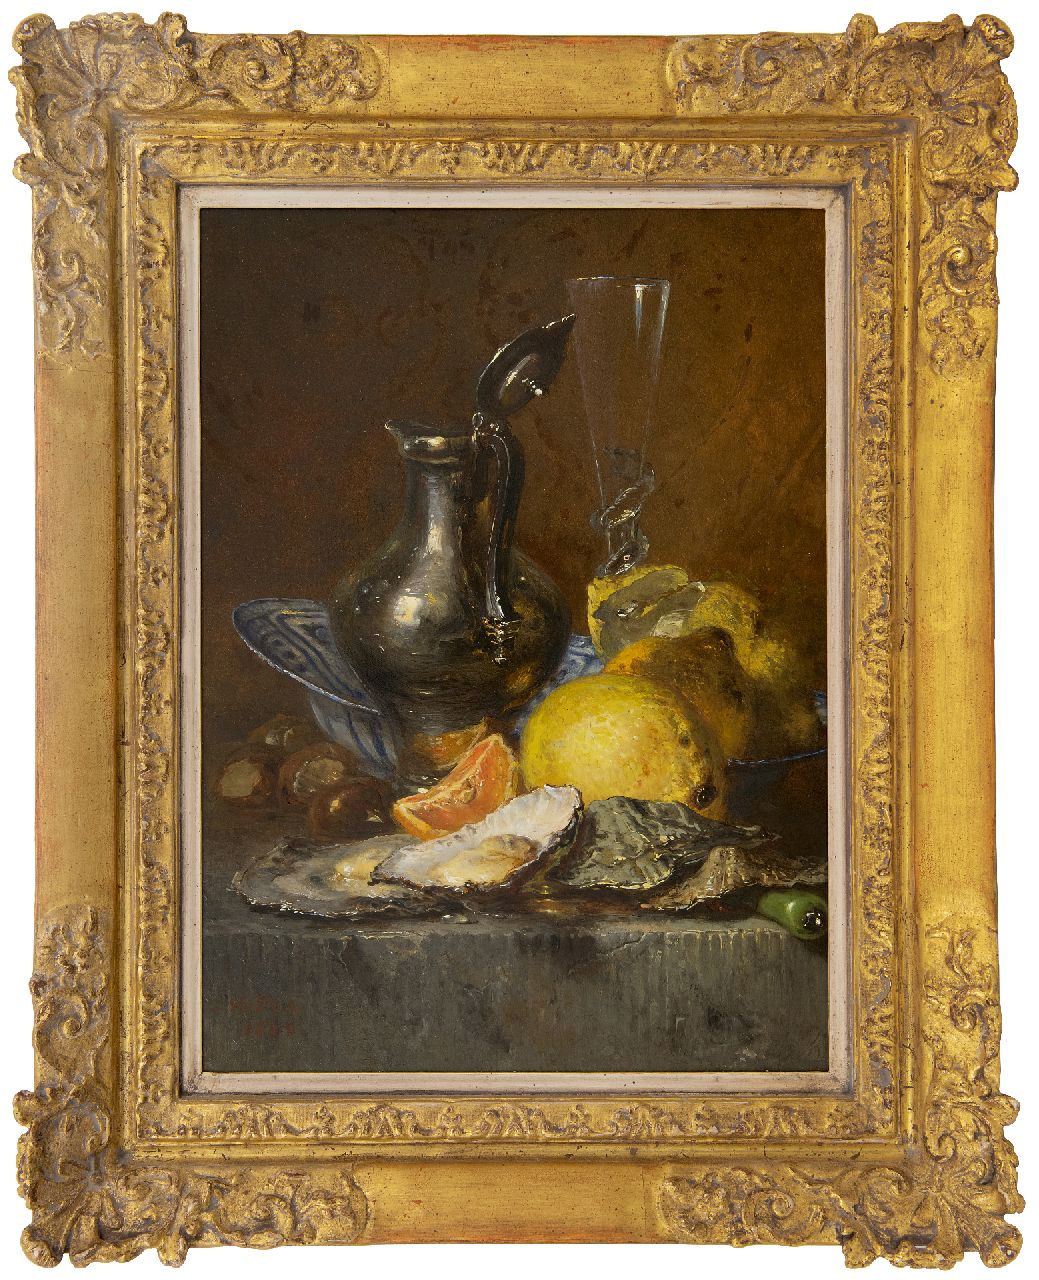 Vos M.  | Maria Vos | Paintings offered for sale | Still life with oysters, lemons and silver jug, oil on panel 38.6 x 27.6 cm